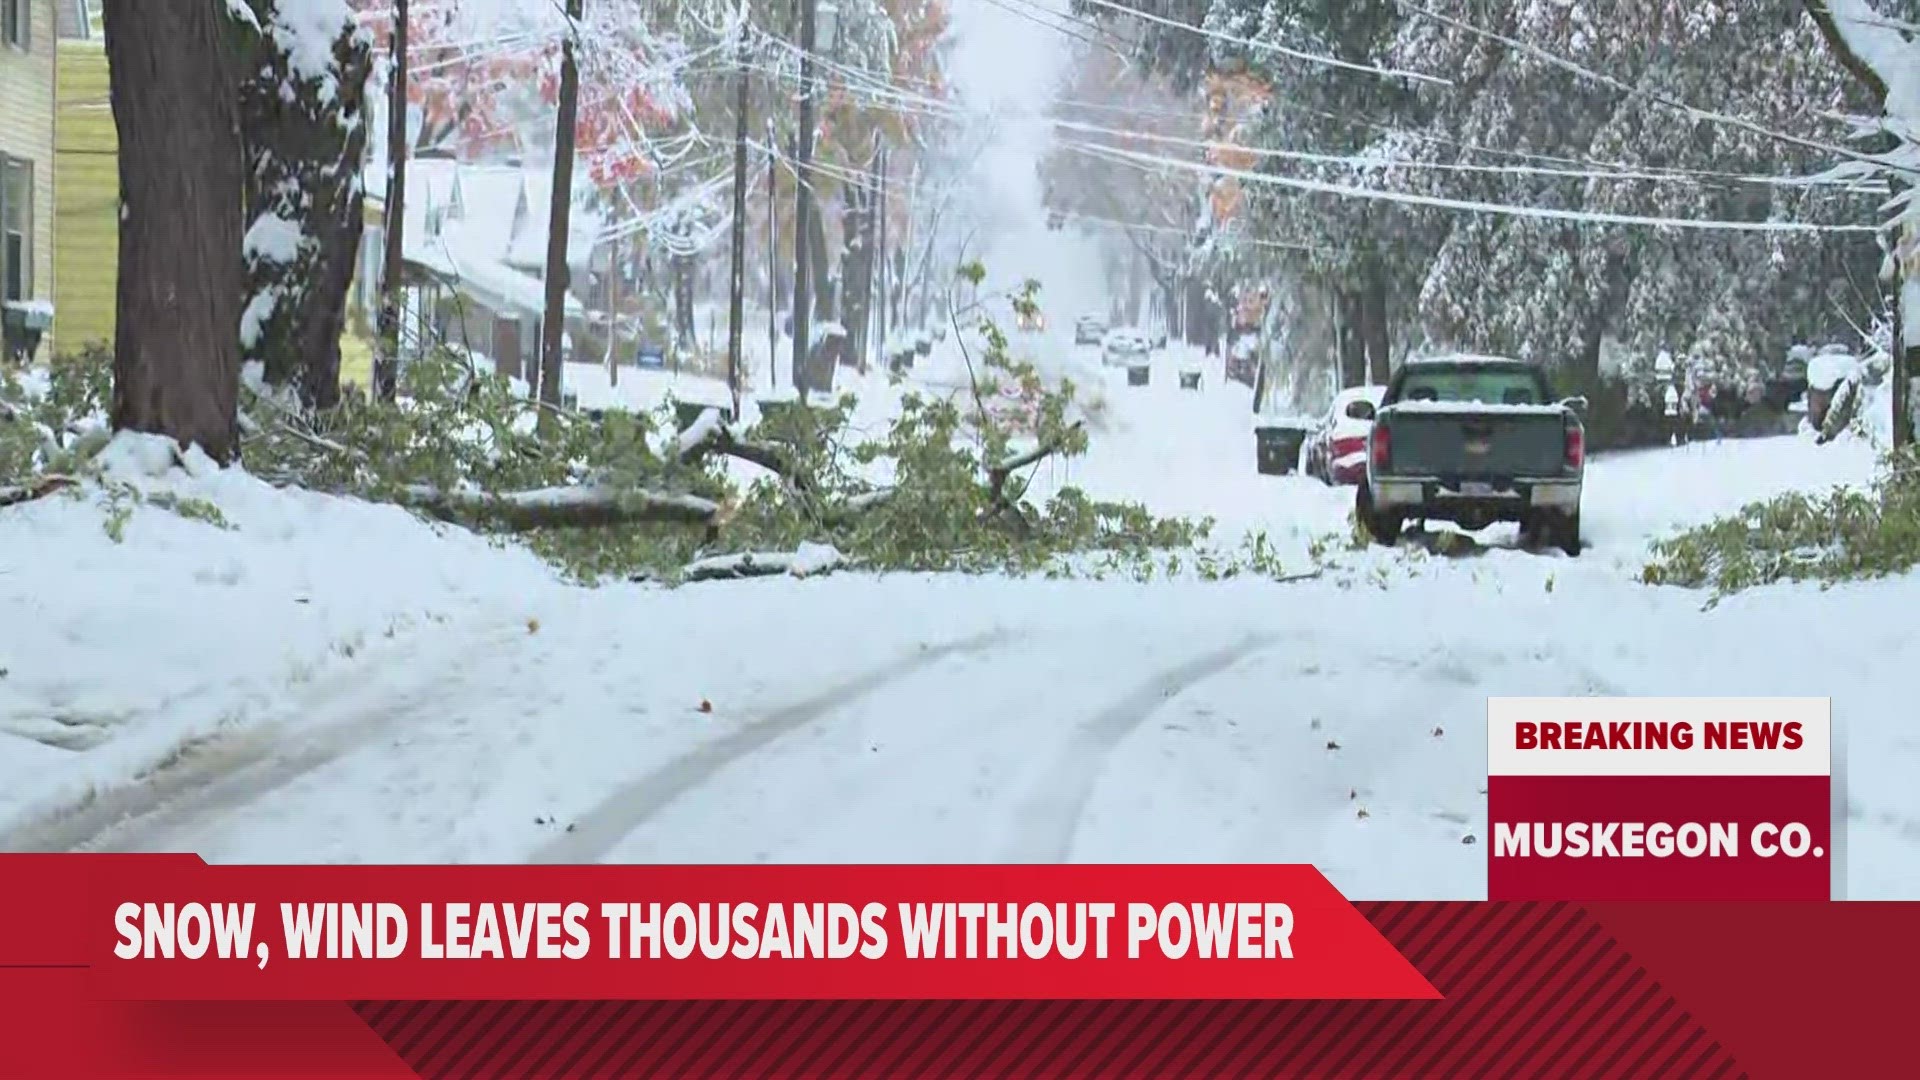 First responders are juggling downed power lines, crashes, slide-offs and more along the lakeshore. Crews will be working to restore power as soon as possible.